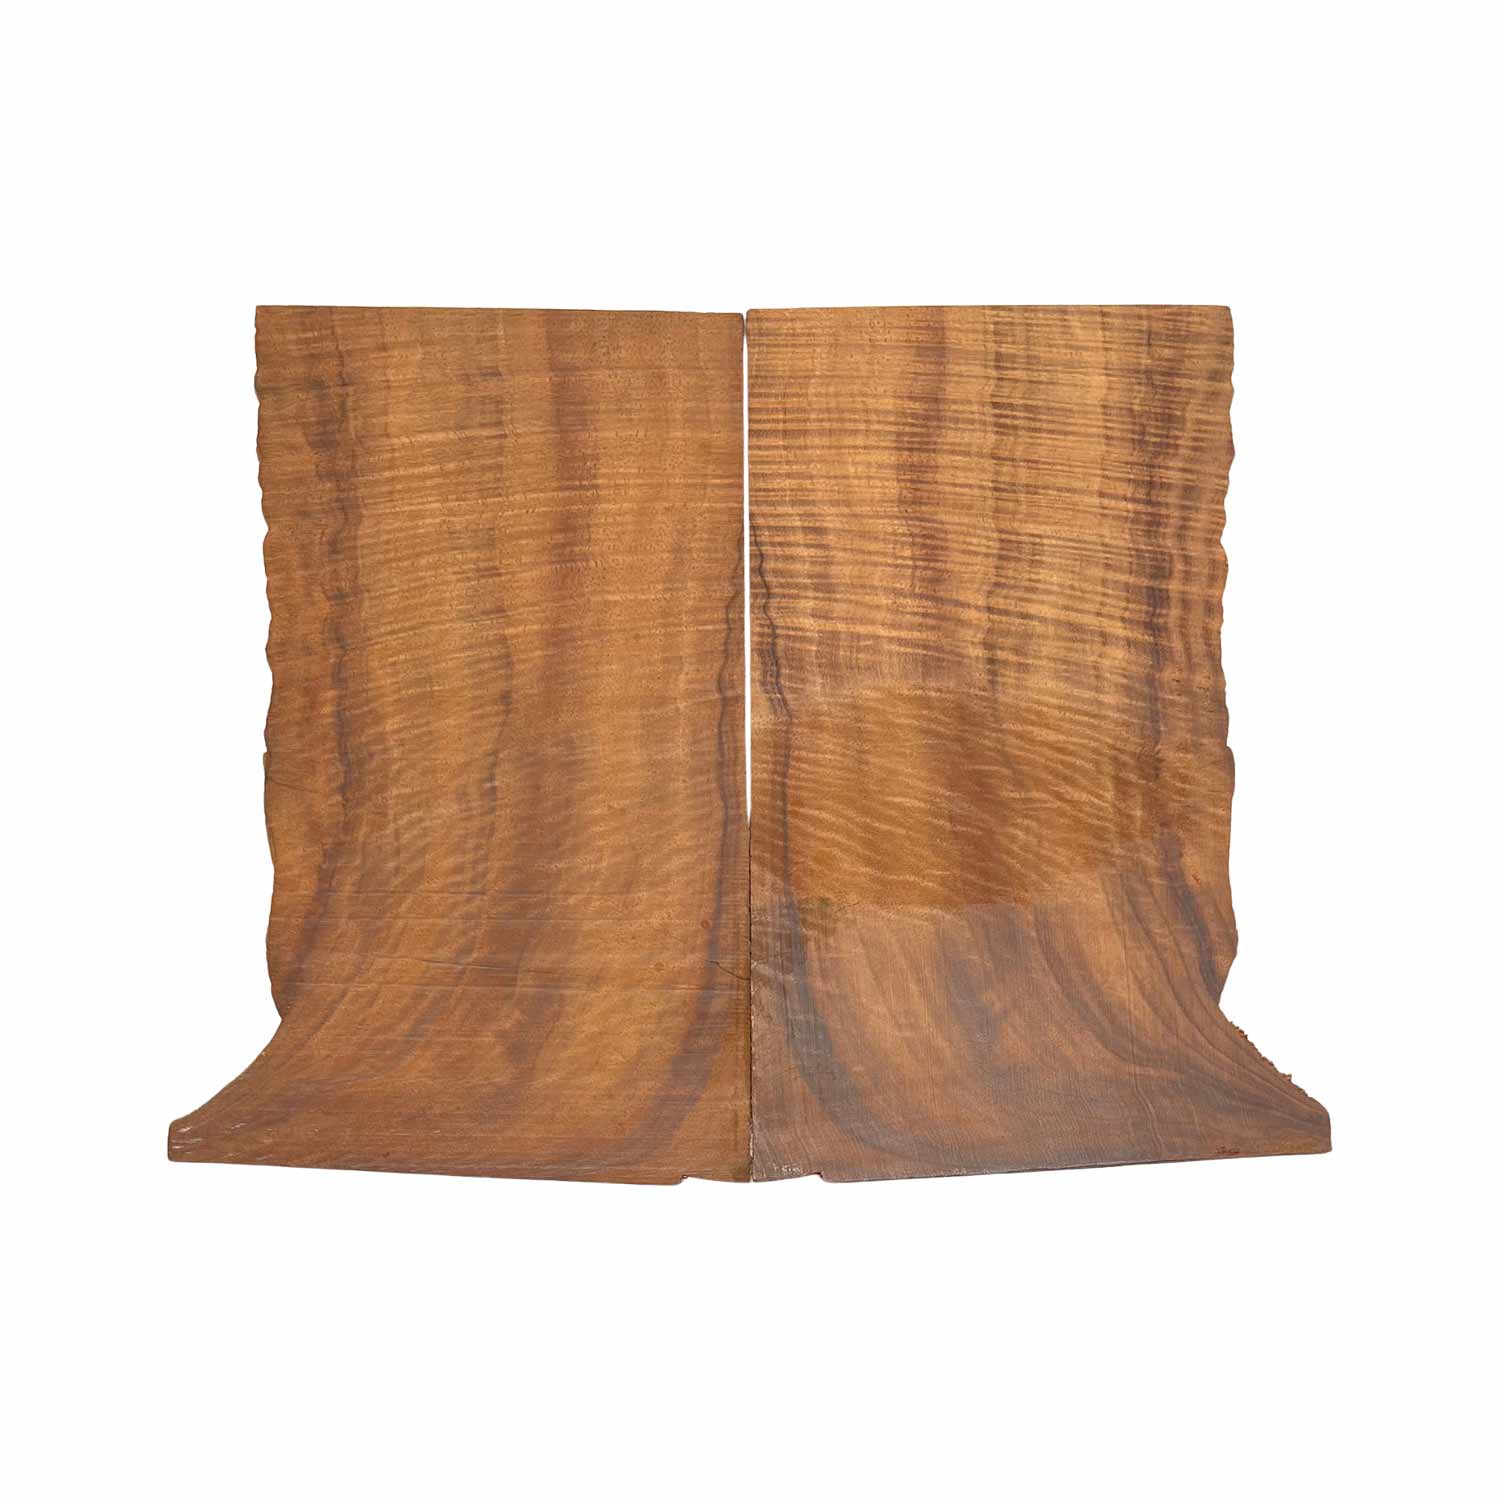 Flame Koa Bookmatched Thin Lumber 10-1/2&quot; x 6&quot; x 1/8&quot; - 2 pieces 